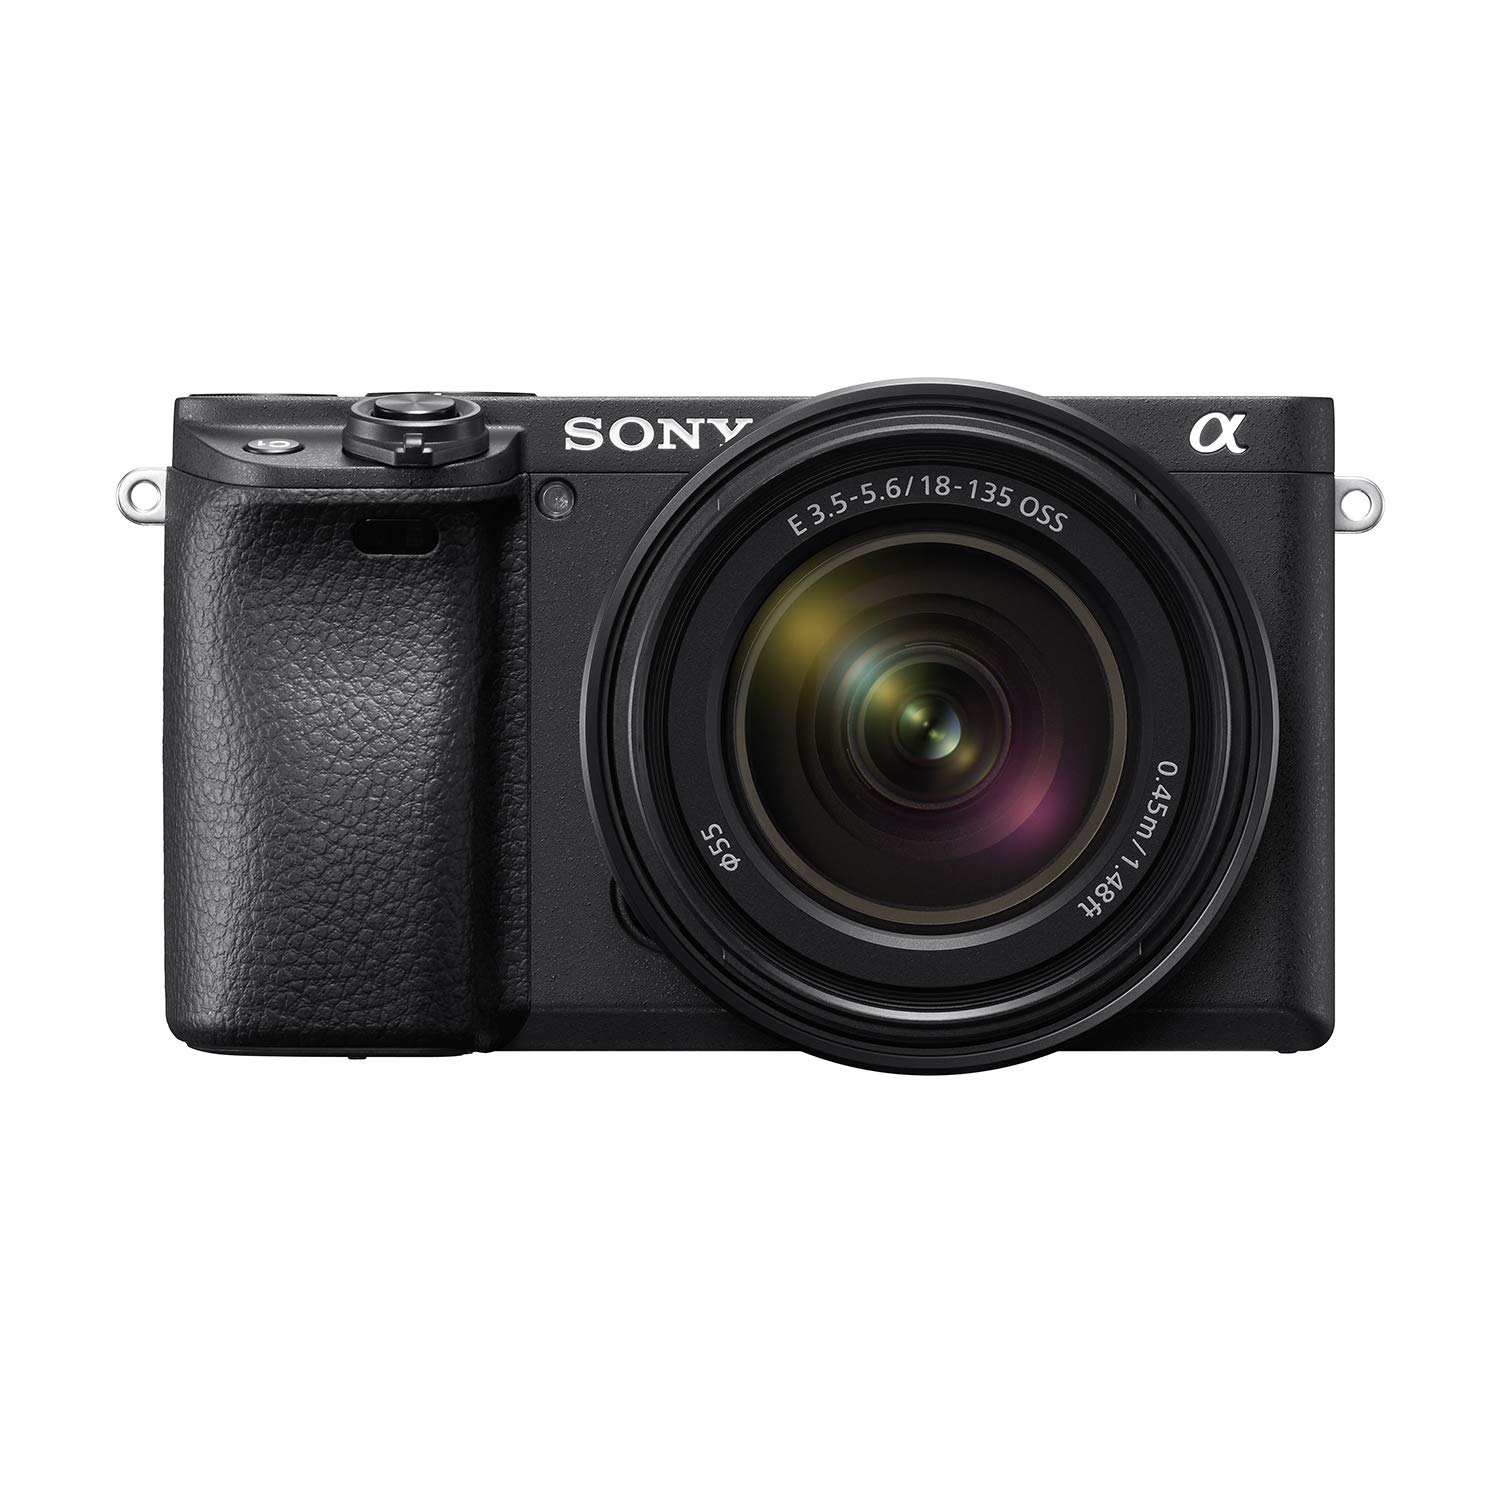 Sony Alpha a6400 Mirrorless Camera: Compact APS-C Interchangeable Lens Digital Camera with Real-Time Eye Auto Focus, 4K Video, Flip Screen & 18-135mm Lens - E Mount Compatible Cameras - ILCE-6400M/B